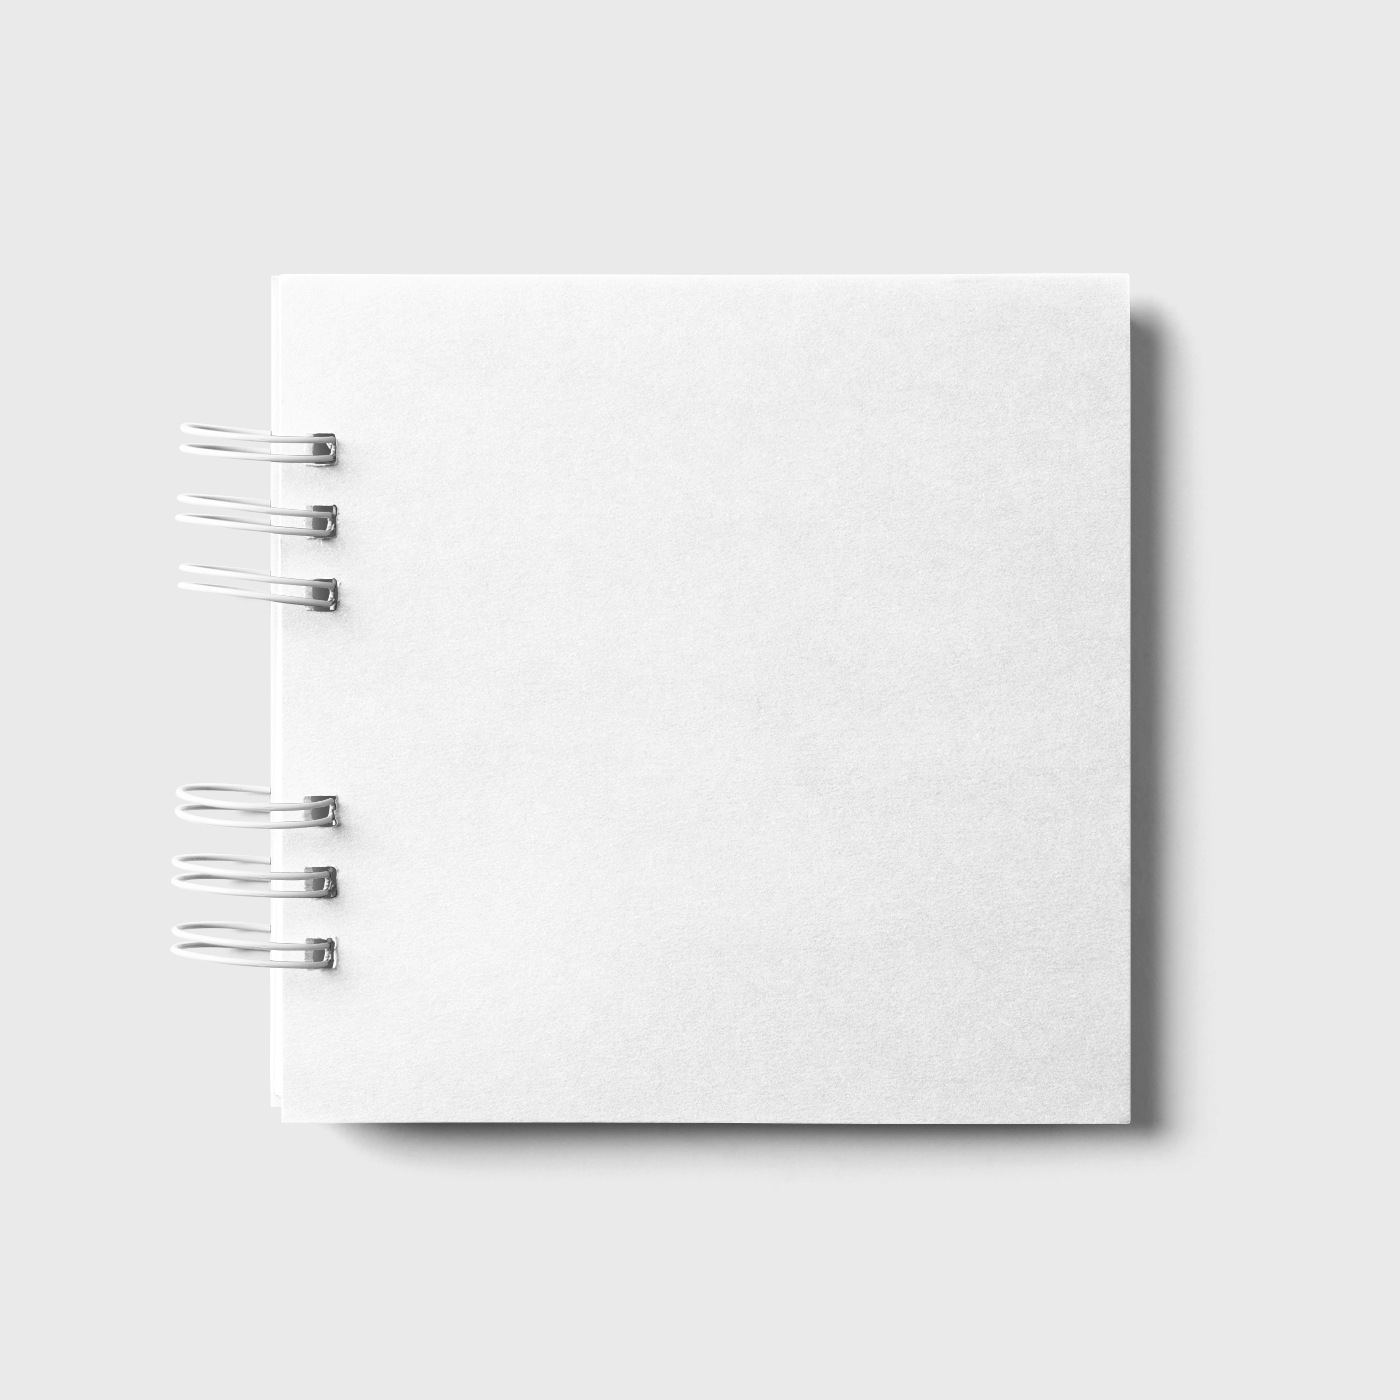 Front View of Square Notebook Mockup FREE PSD